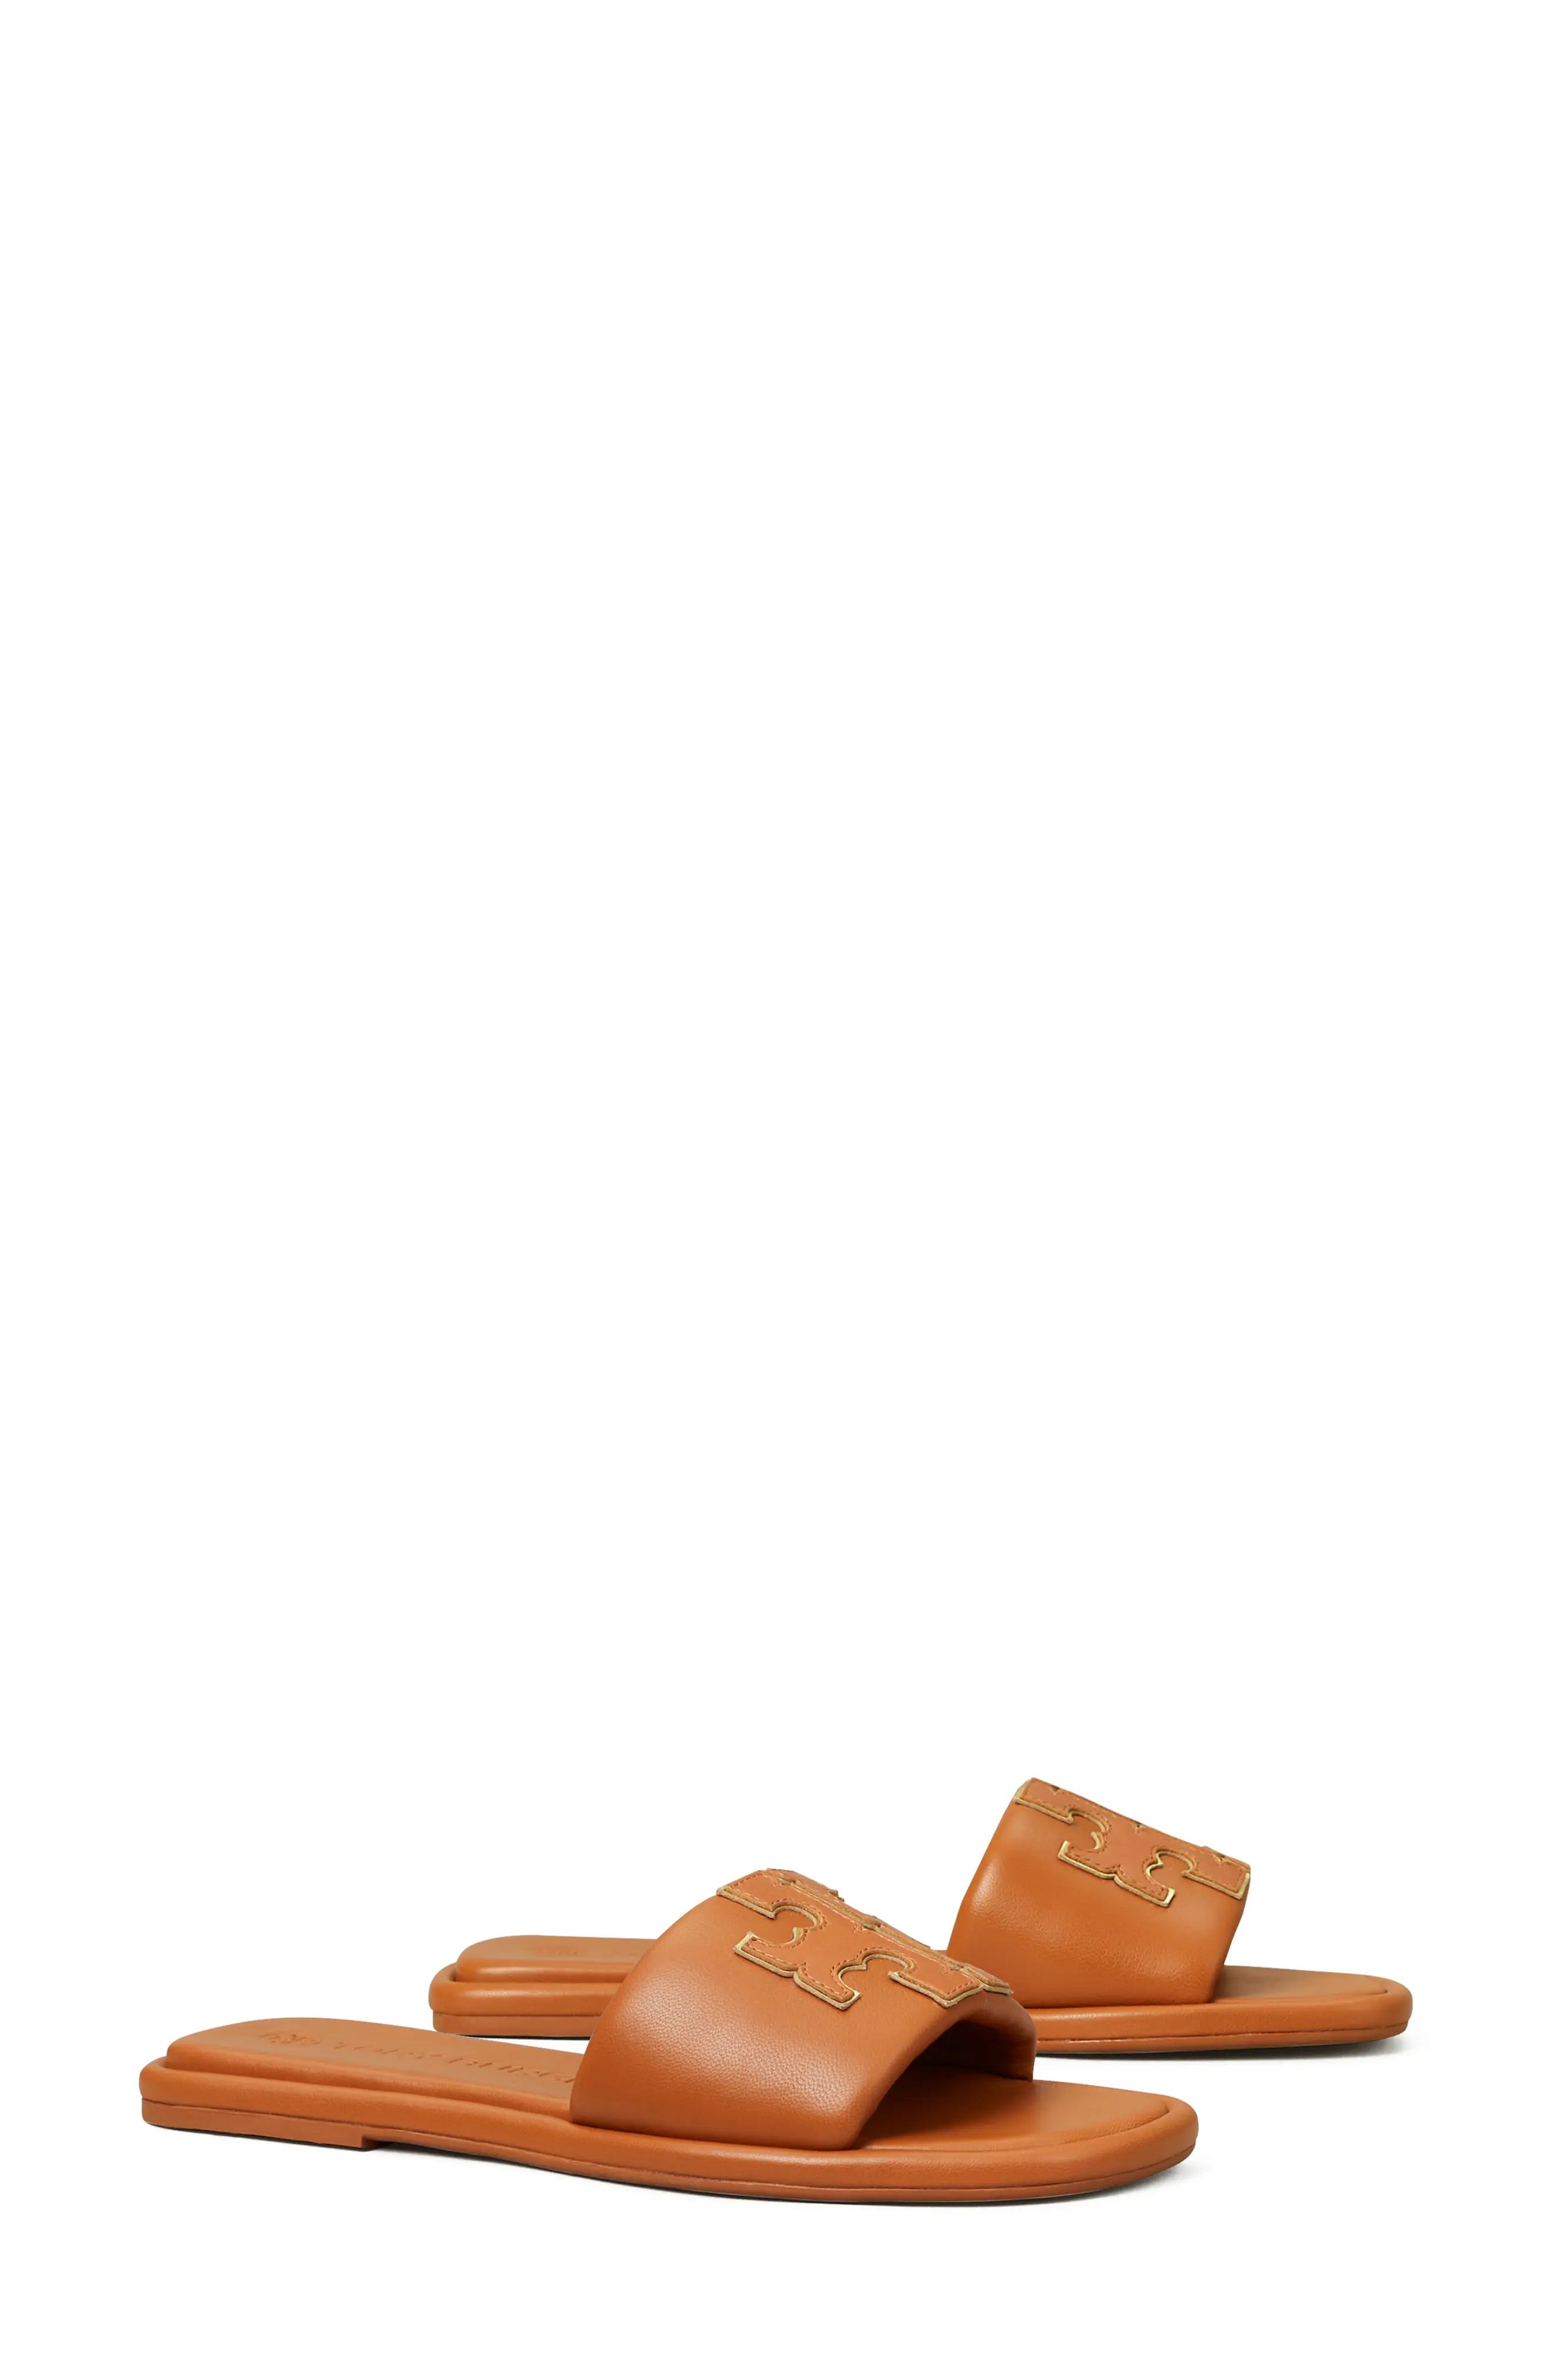 Tory Burch Double T Sport Slide Sandal in Aged Camello /Gold at Nordstrom, Size 10 | Nordstrom